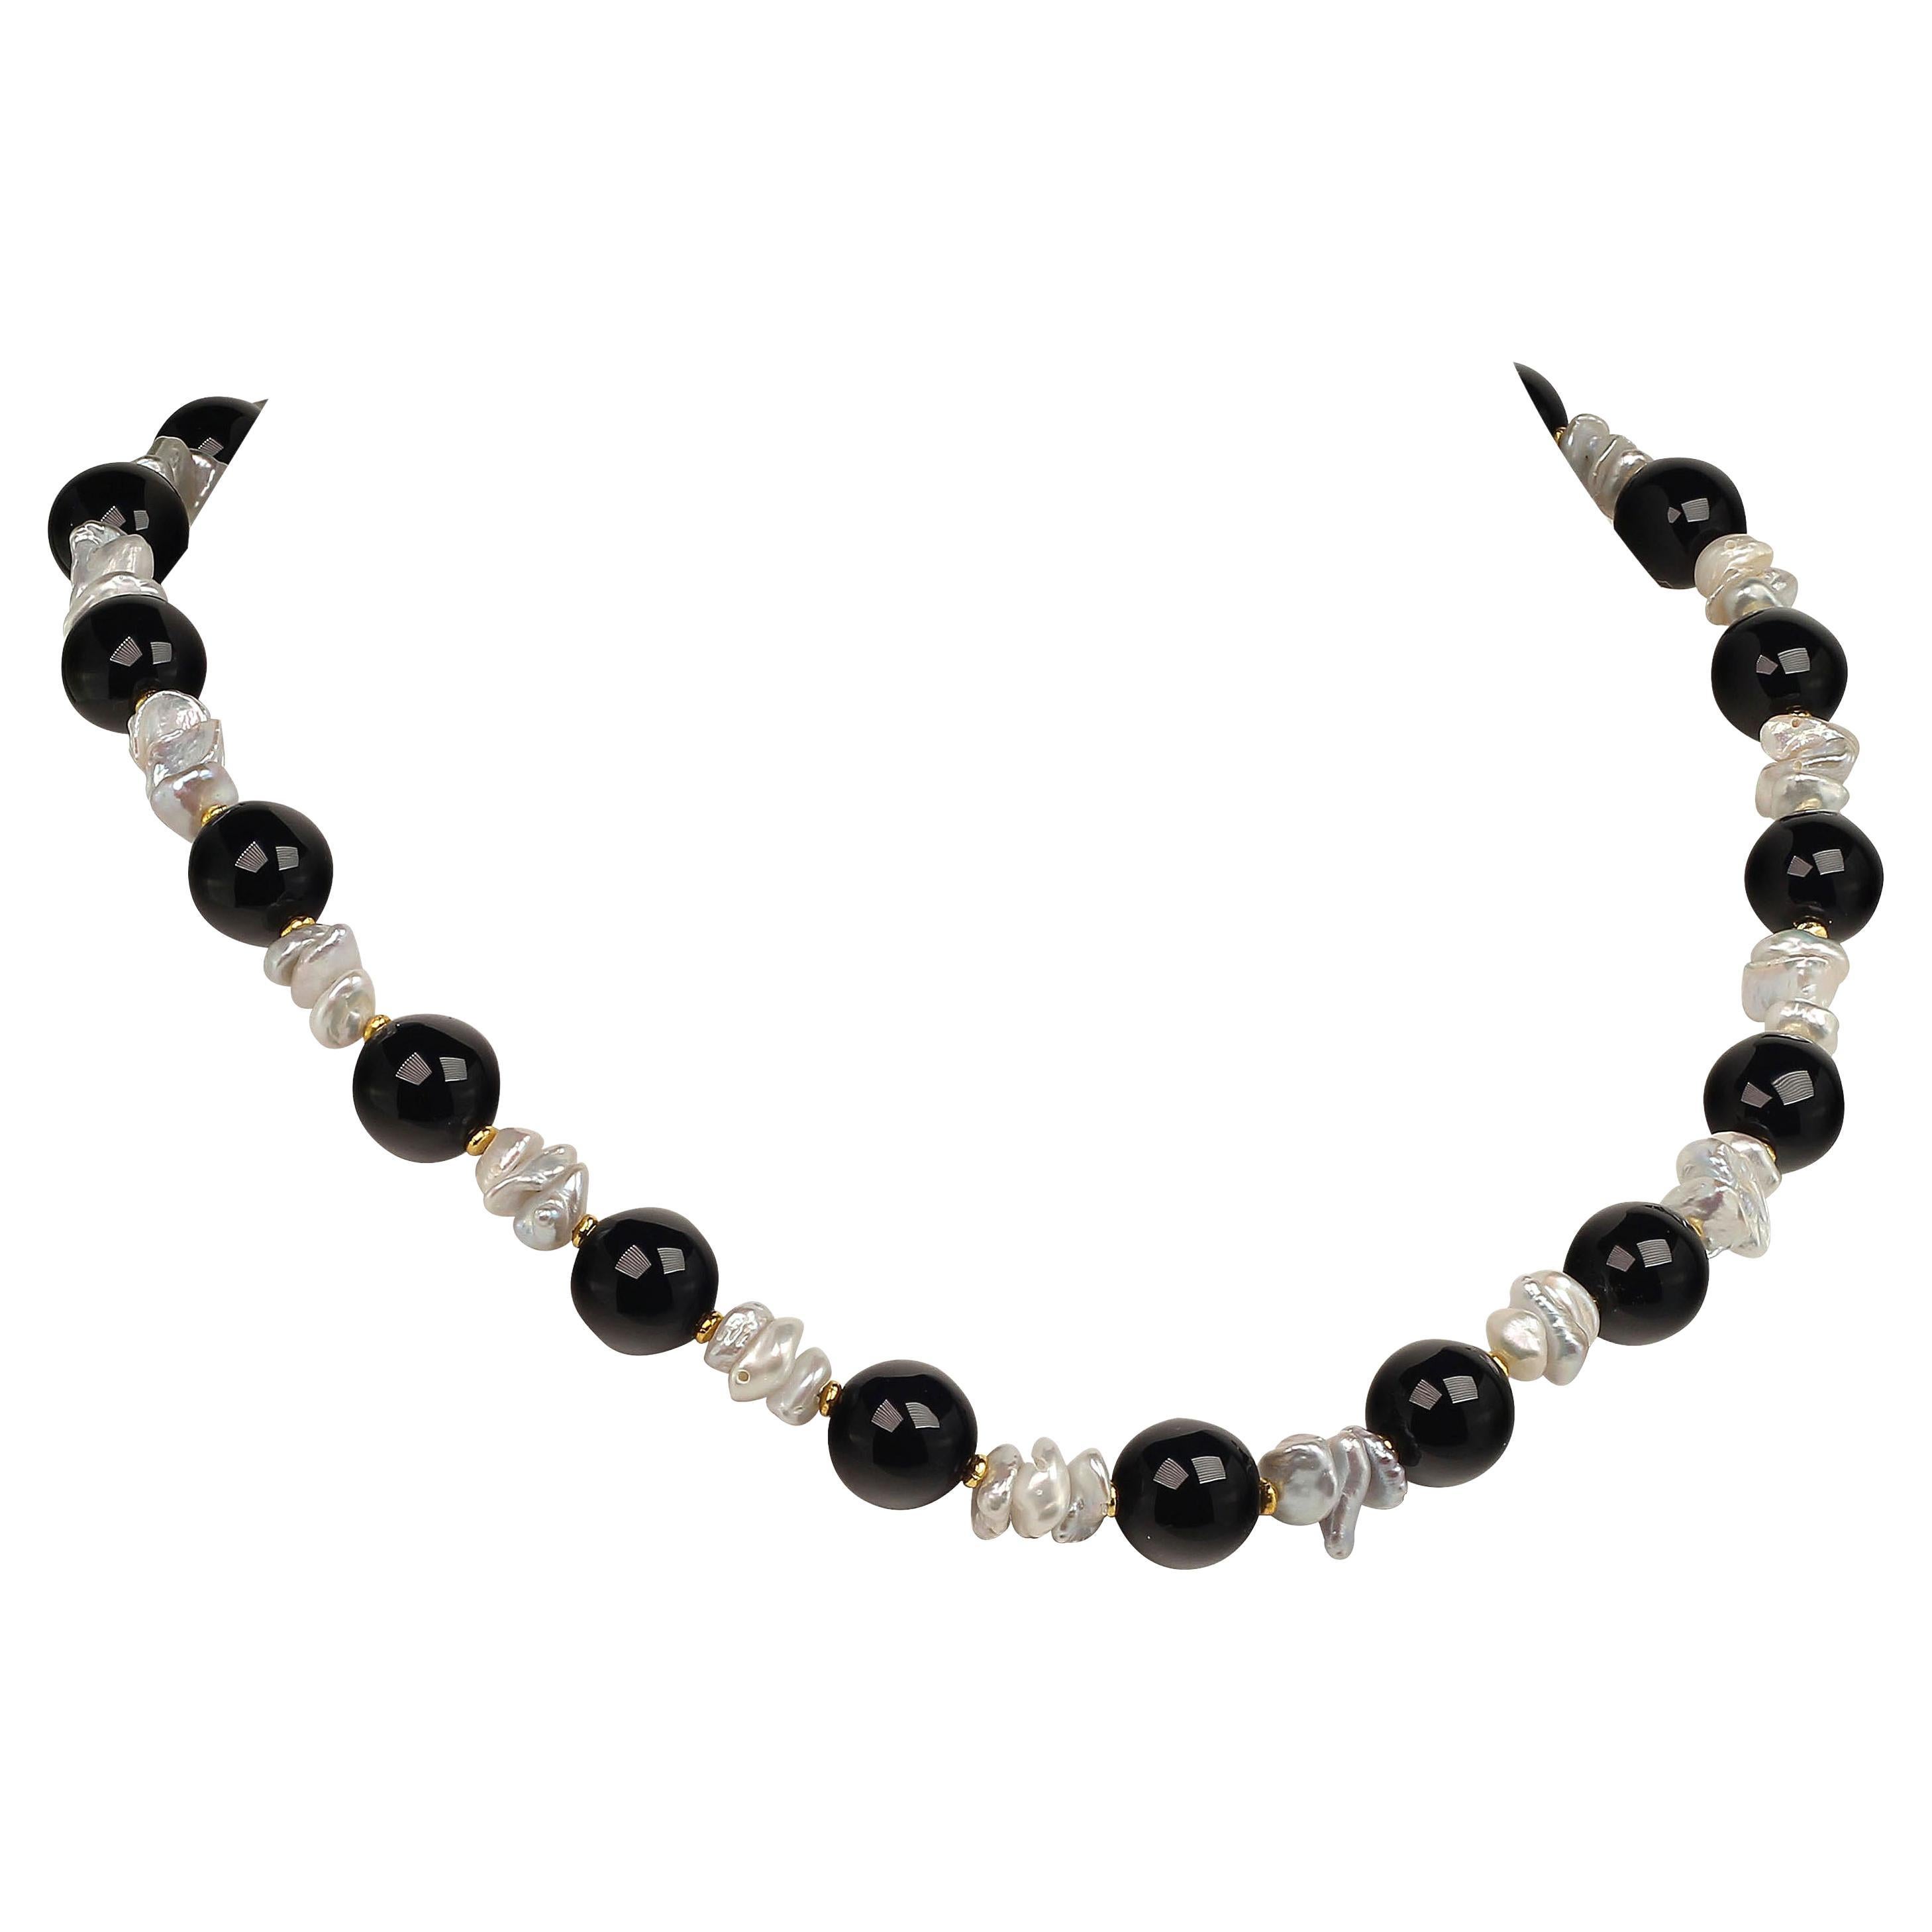 Own the jewelry you desire

Elegant necklace of glistening Black Onyx (12MM) and iridescent White free form Pearls with gold tone accents.  This unique 18 inch necklace is perfect for all occasions and will enhance any ensemble.  It is secured with